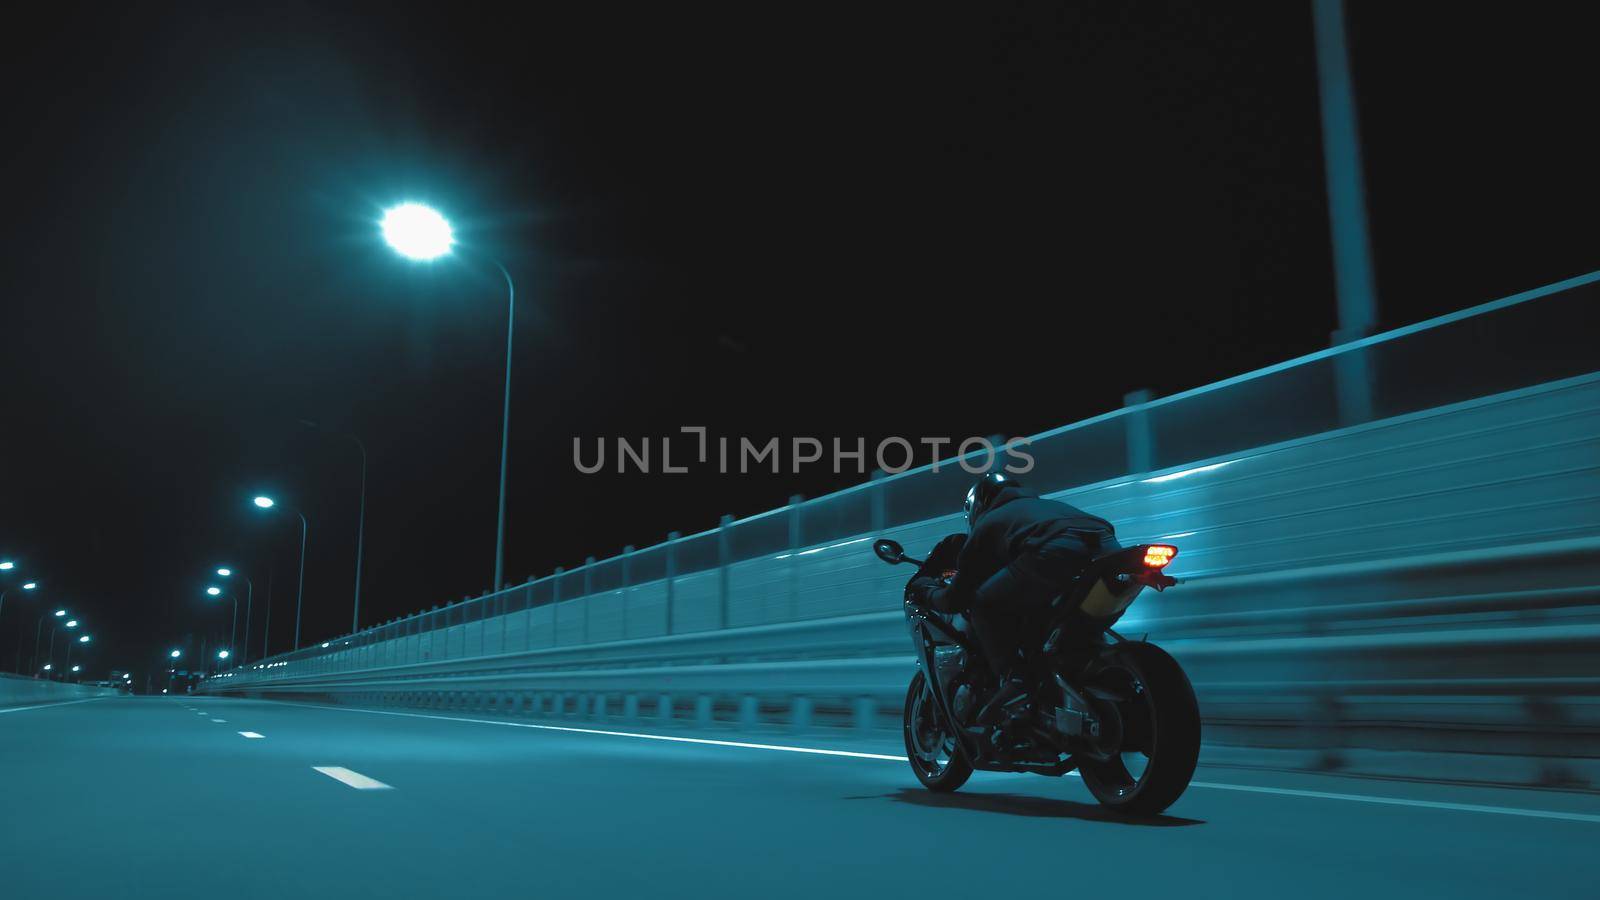 A man rides a sports motorcycle on a night track by studiodav